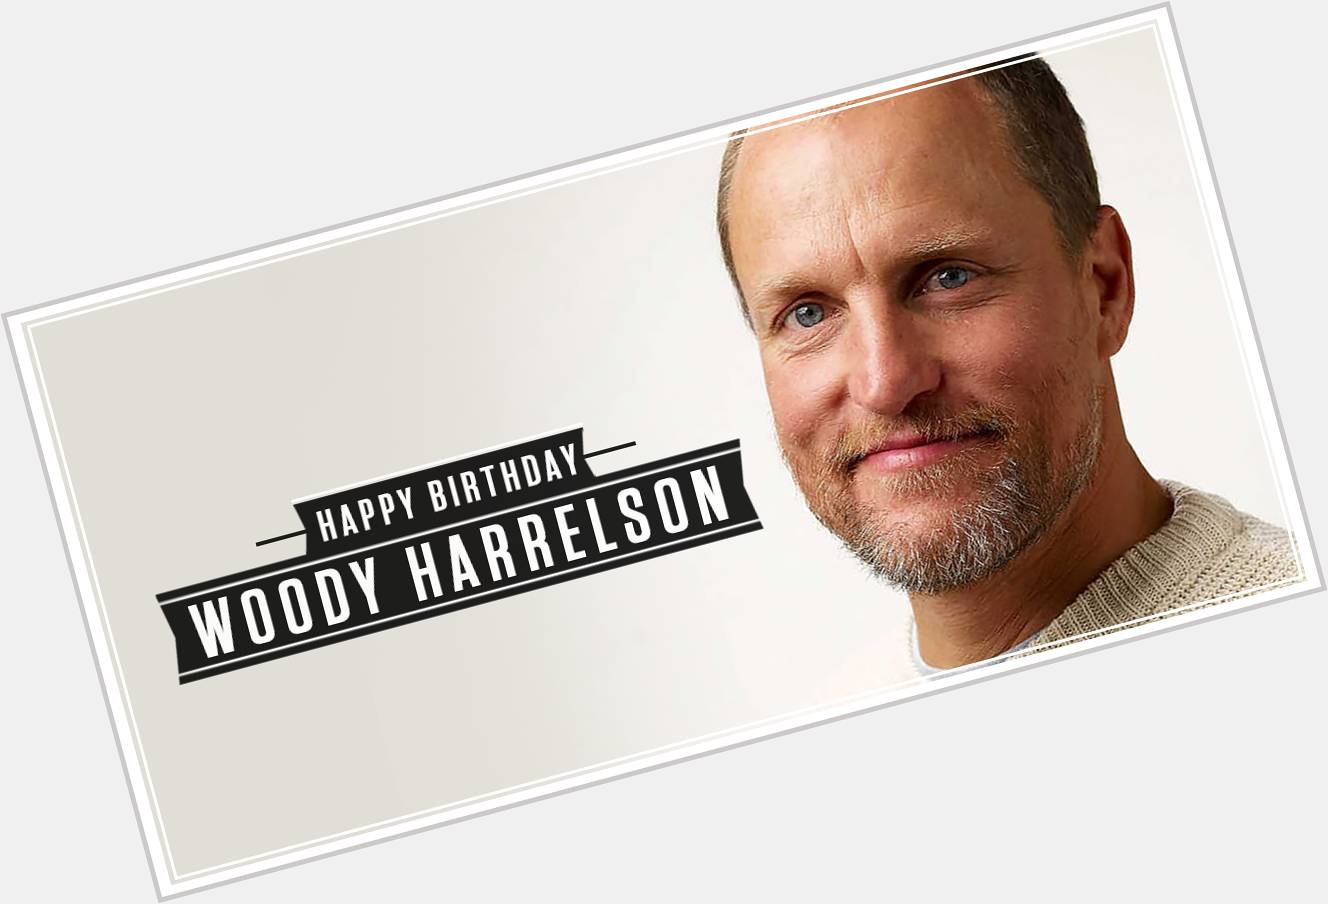 Raise a toast to Woody Harrelson a.k.a. Haymitch and to wish him a Happy Birthday! 